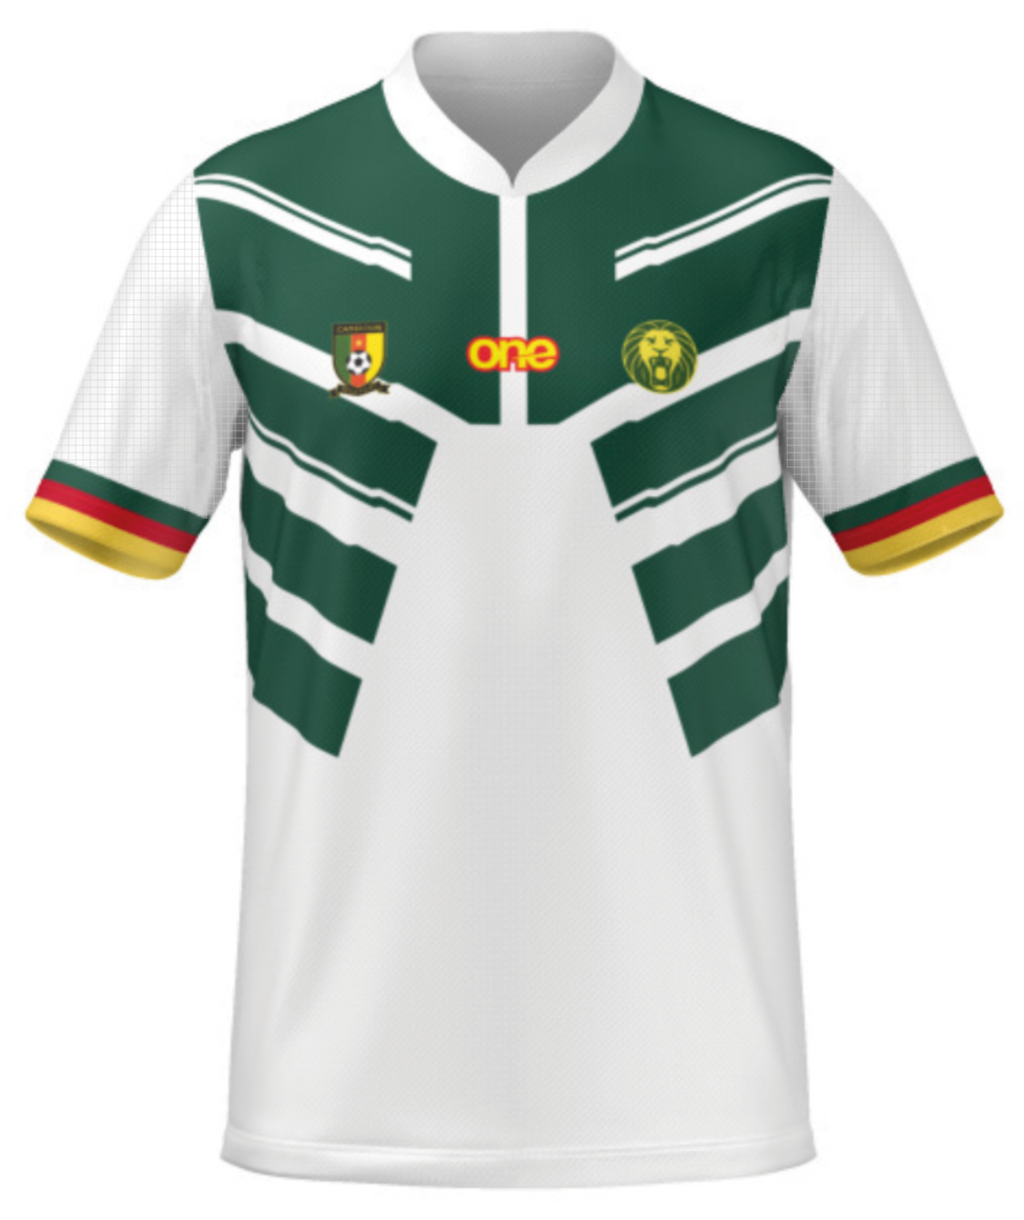 Official Cameroon FECAFOOT White Pro Jersey